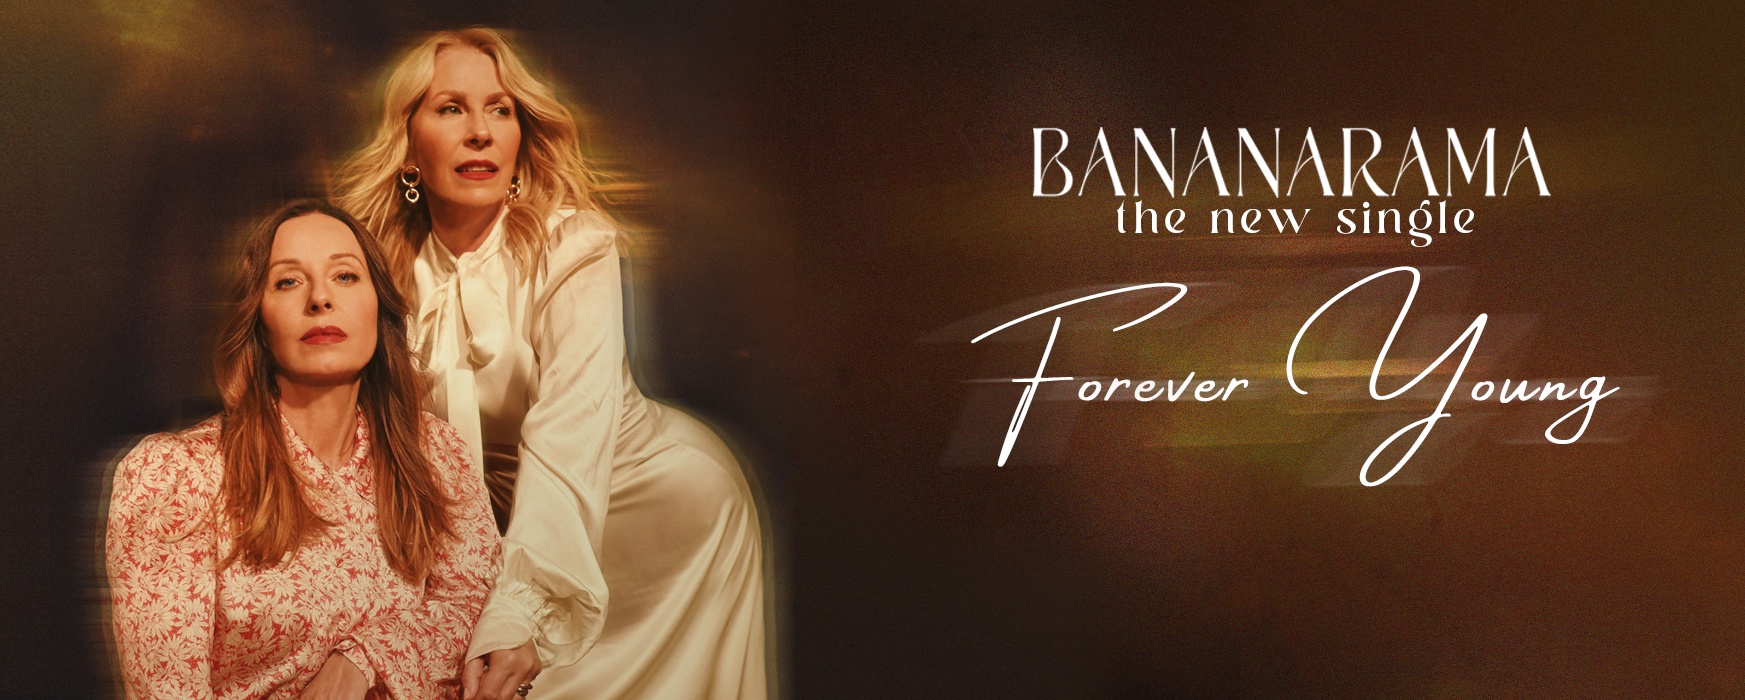 Listen To Brand New Bananarama Song "Forever Young"